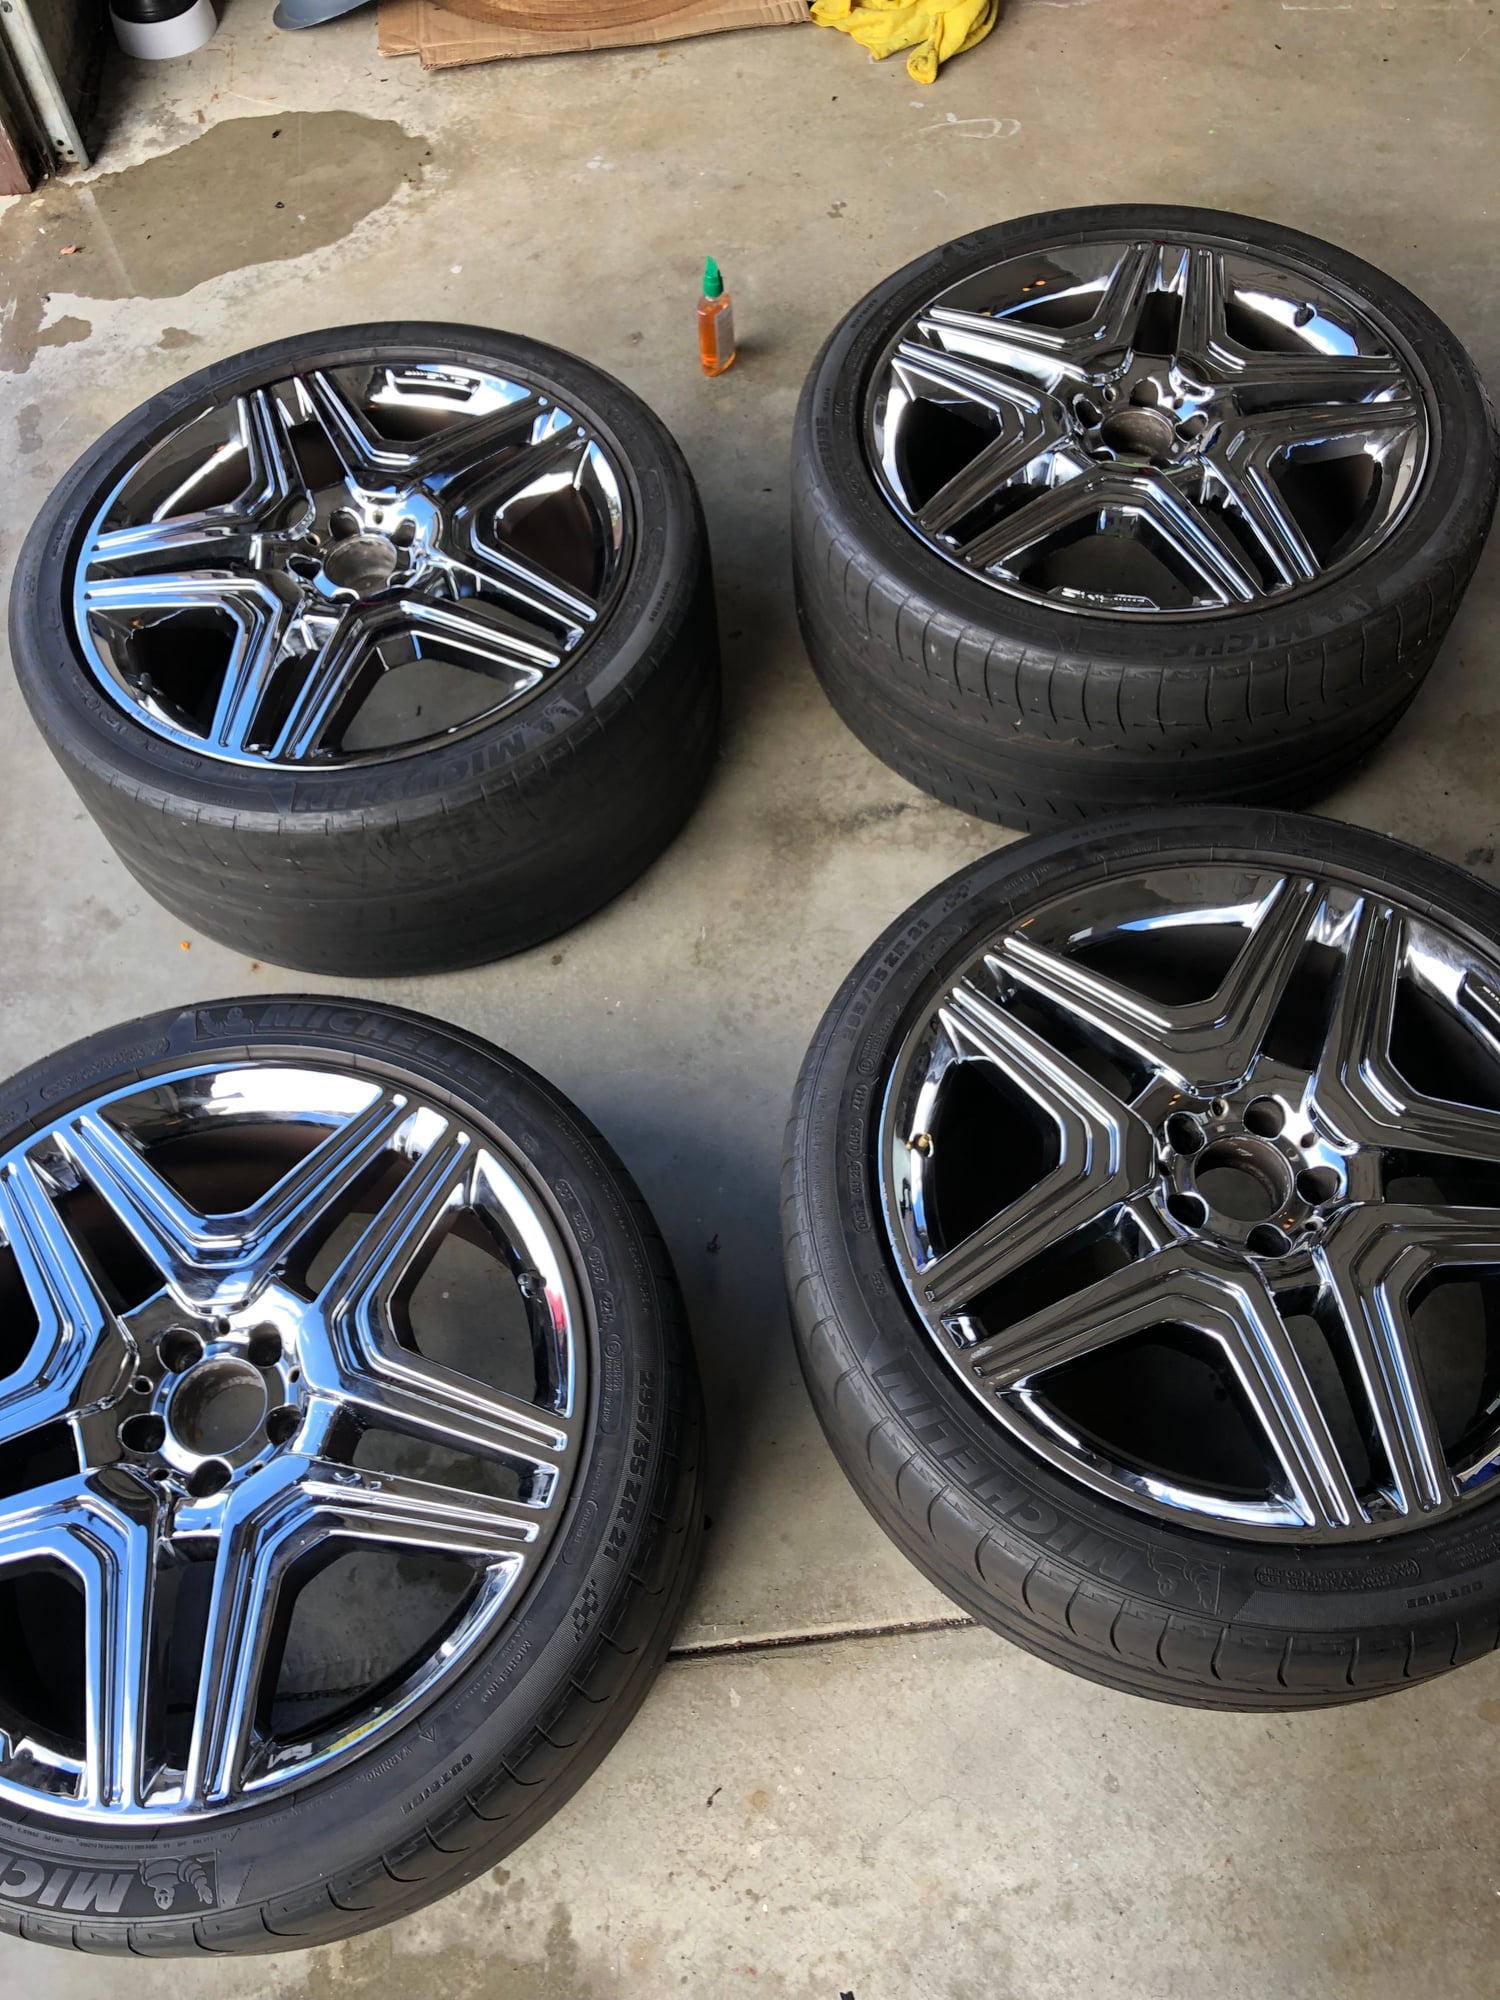 Wheels and Tires/Axles - FS: OEM chrome ML63 wheels - Used - Foster City, CA 94404, United States